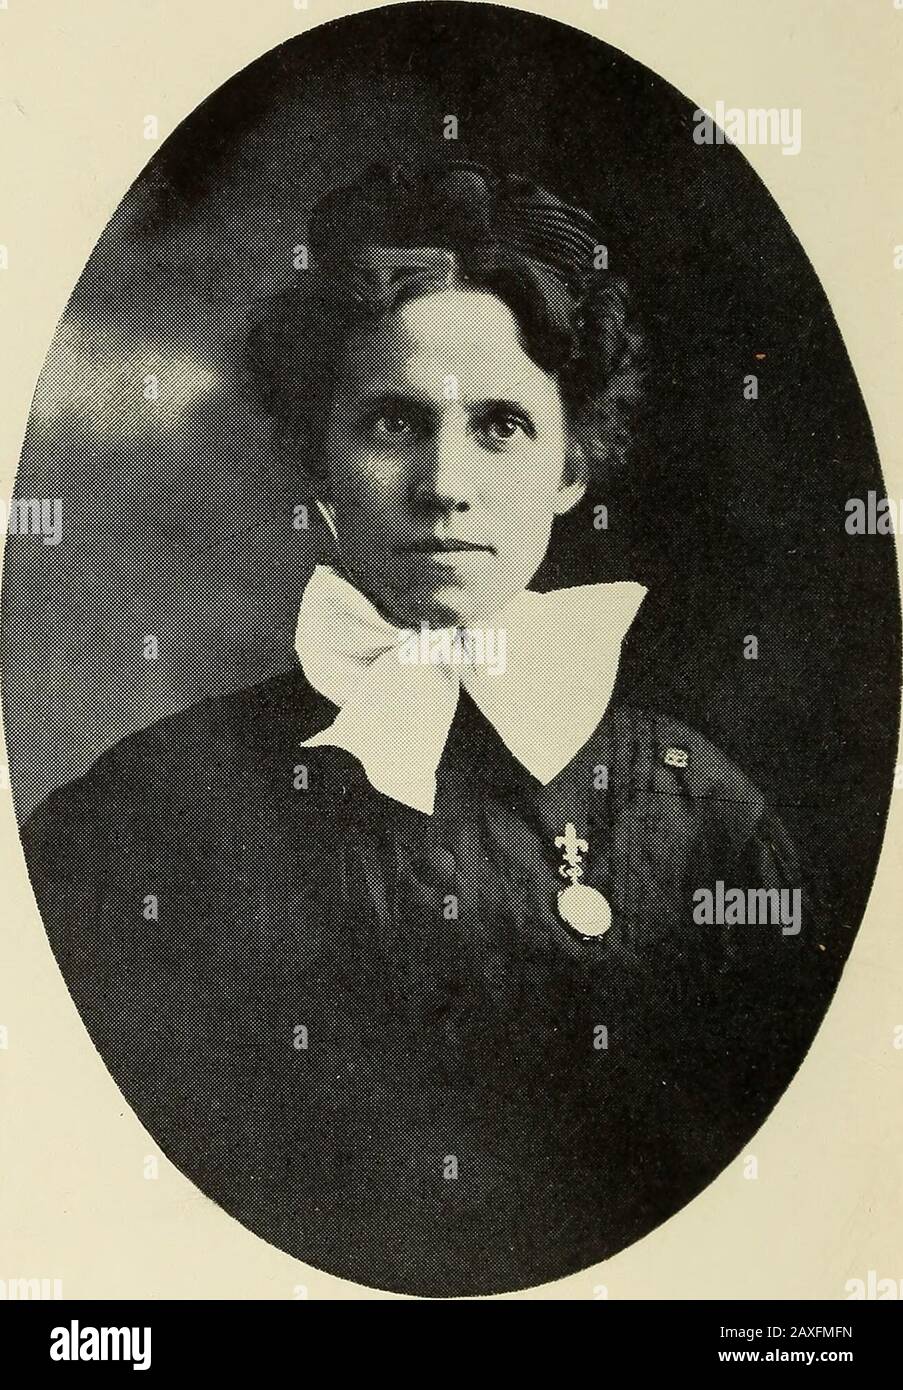 The morning-glory.. . 0 017 527 085 1 §. MISS MAE MCKENZIE, DEACONESS{The Morning-Glory) THE ^st&gt; By Cora Gannaway Williams Nashville, Tejjn. ; Dallas, Tex. Publishing House of the M. E. Church, South Smith & Lamar, Agents igio I «ss&gt; Copyright, 1910 BY Cora Gannaway Williams ©CI.A2614R8 ^ Ota MY BEAUTIFUL MOTHER WHOSE EYES WILL SOME DAY LIGHT THE GLORY LAND I LOVINGLY DEDICATE THESE WORDS (3) CONTENTS CHAPTER I Page The Mill Town n CHAPTER IIThe Separation 24 CHAPTER IIIThe Georgia Home 31 CHAPTER IVHome Missions 44 CHAPTER VTnE Awakening 61 CHAPTER VIThe Healing Springs 79 CHAPTER VIIC Stock Photo